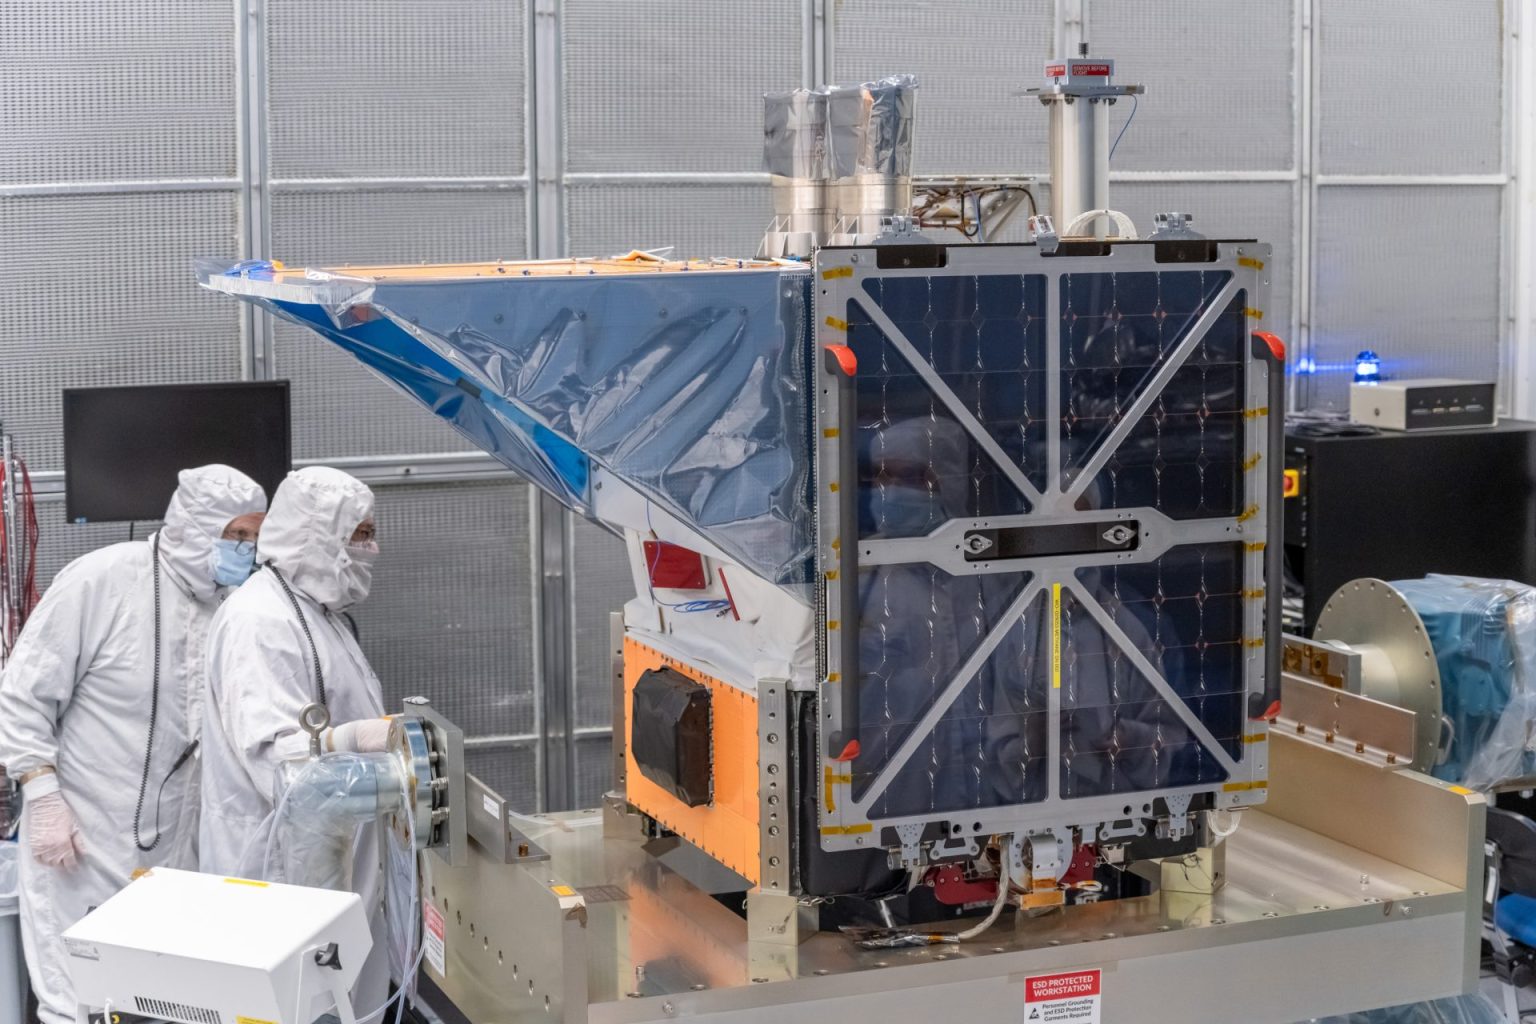 MethaneSAT Install Credit BAE Systems